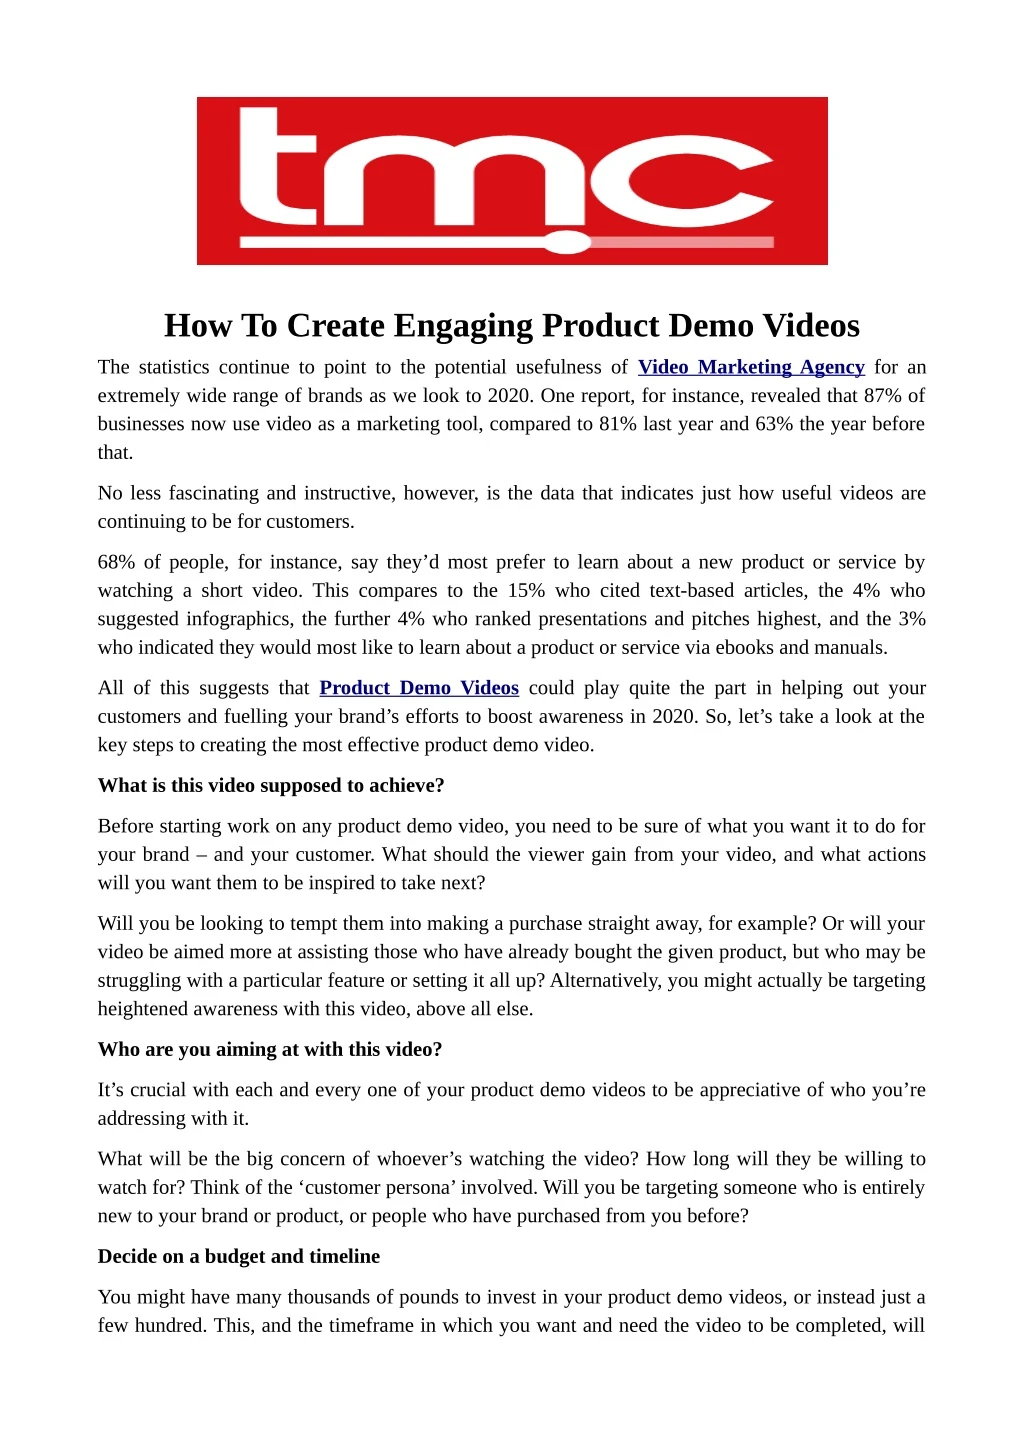 how to create engaging product demo videos